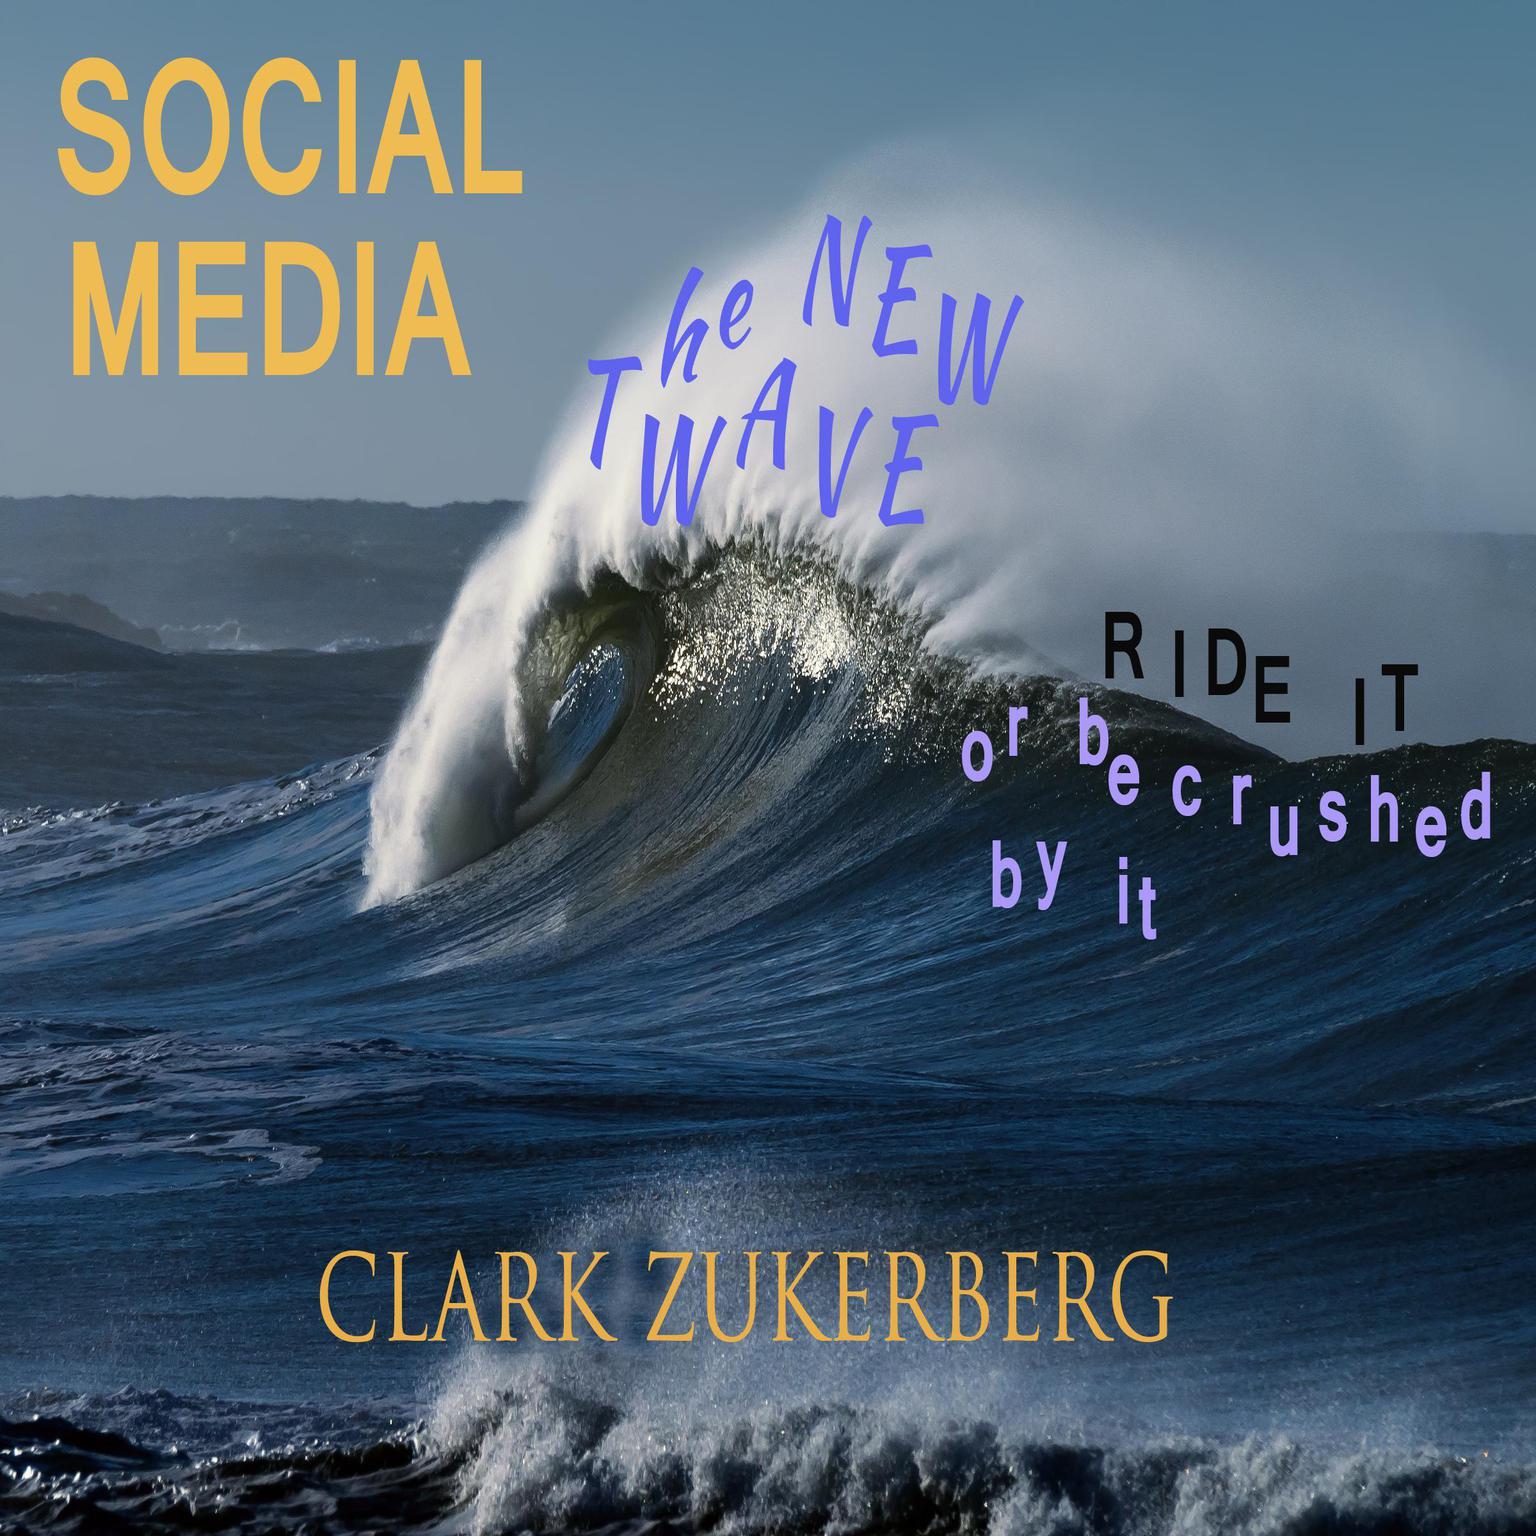 Social Media - The New Wave - Ride it -or be crushed by it Audiobook, by Clark Zukerberg